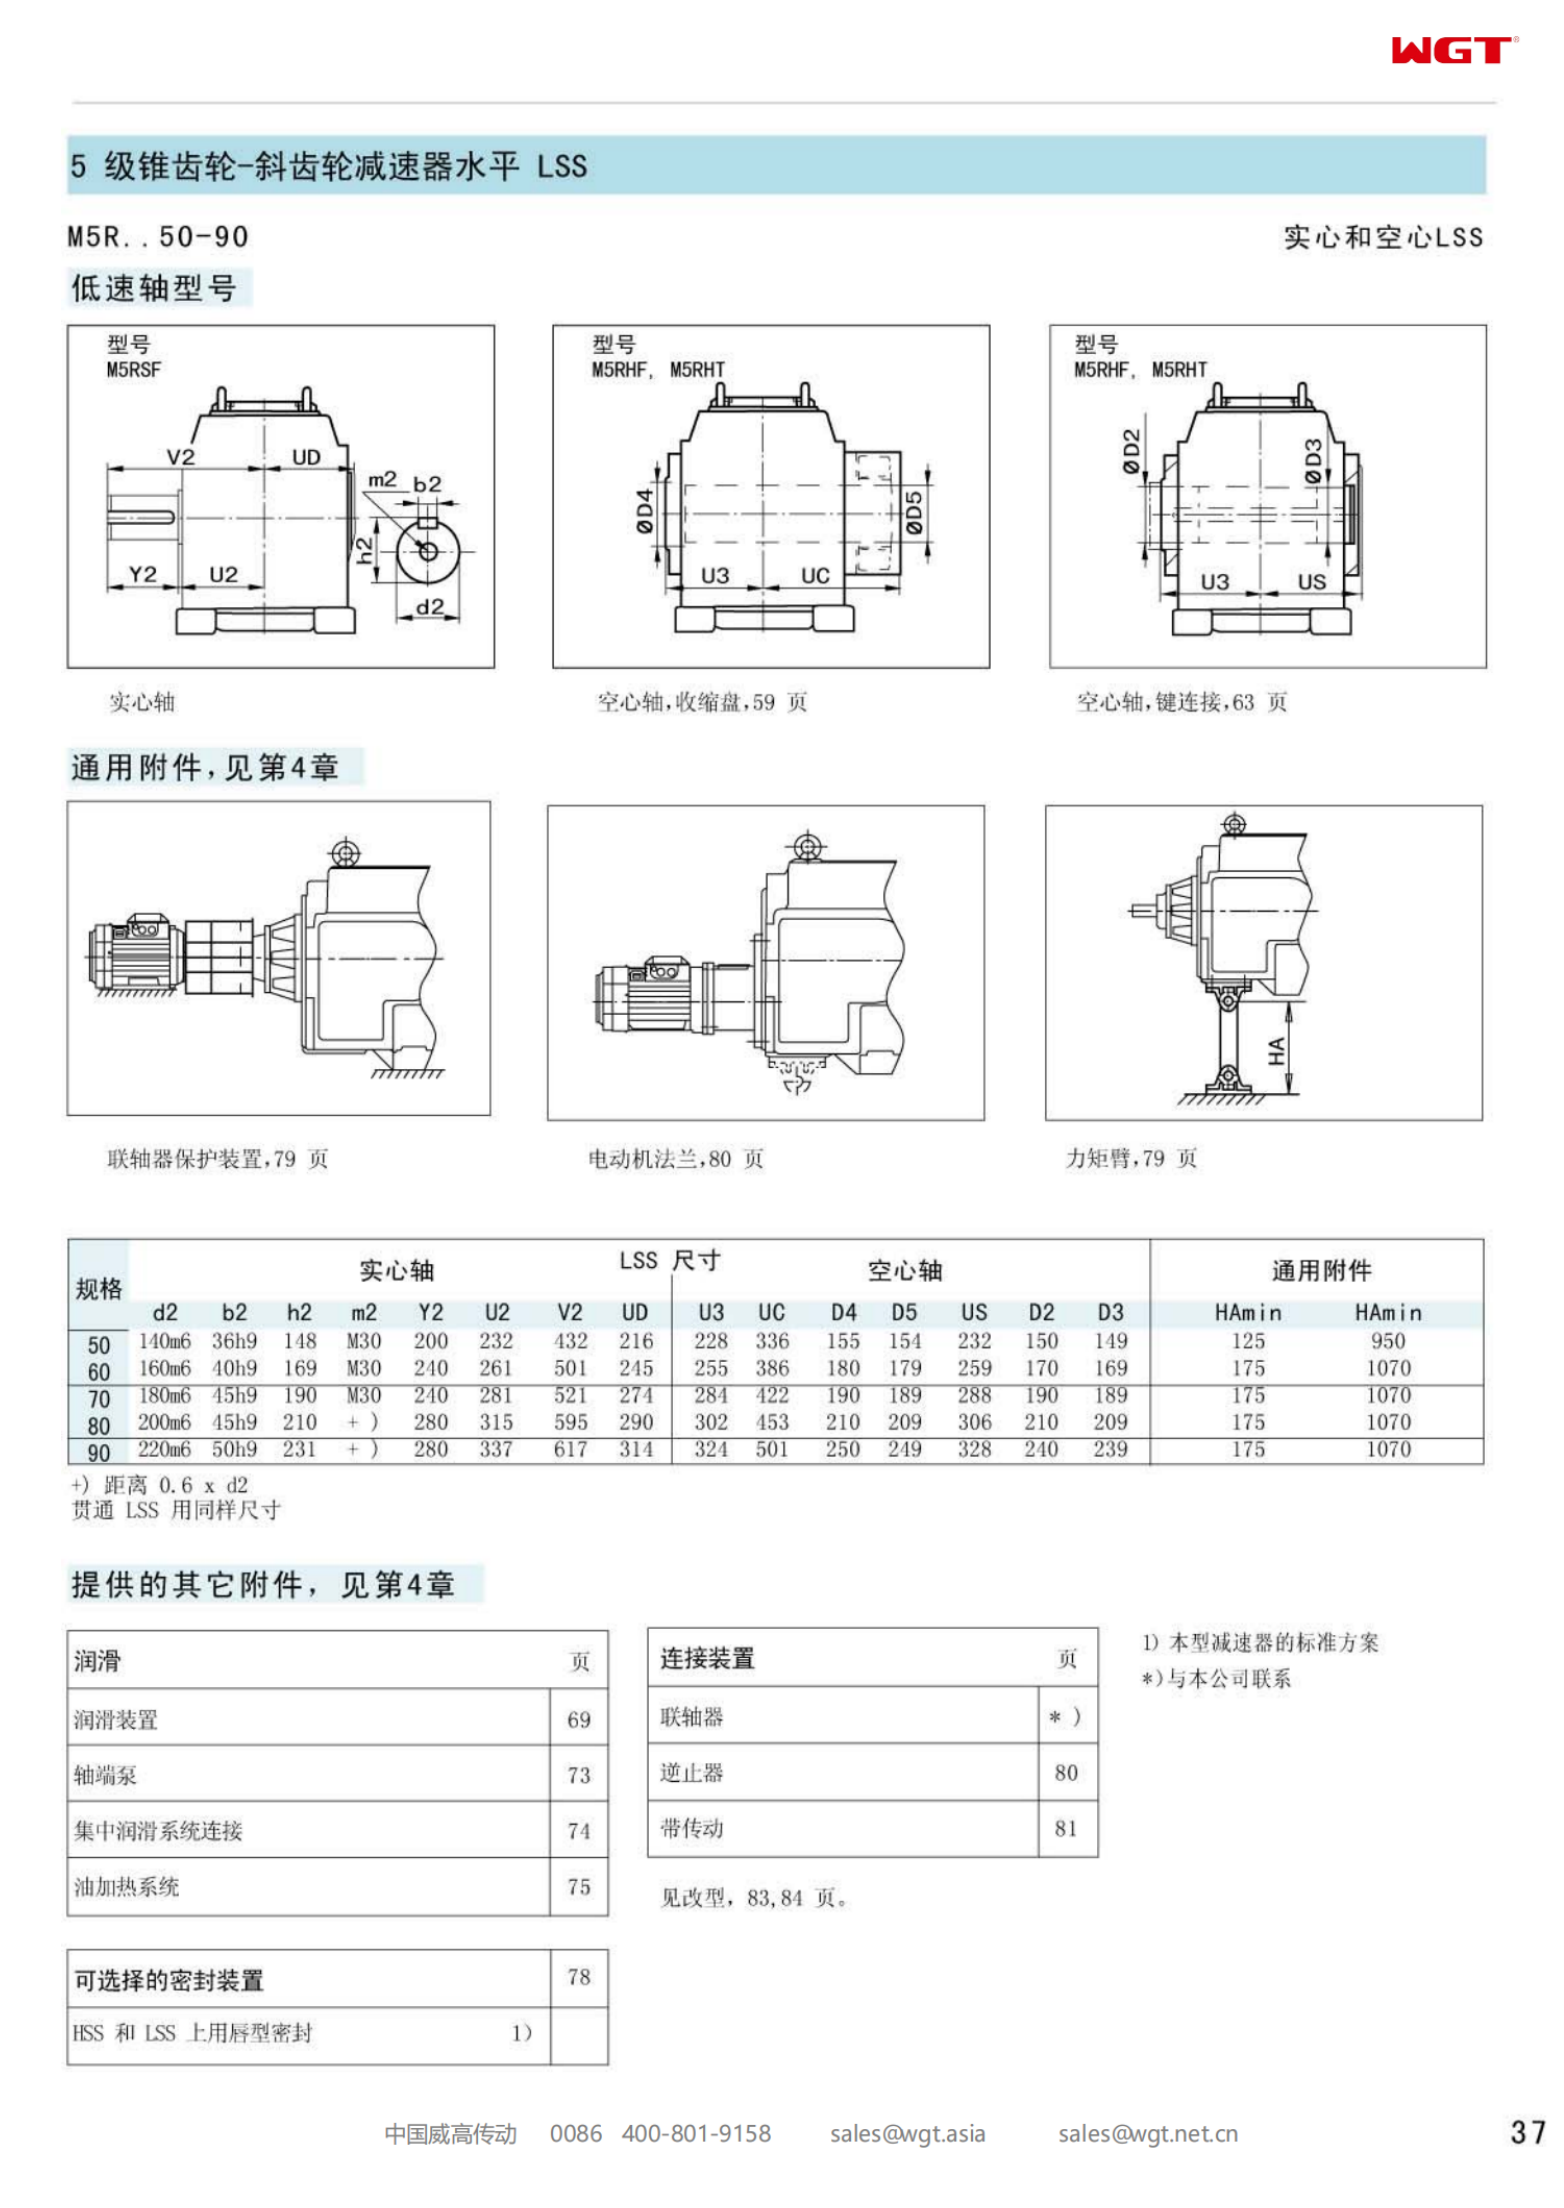 M5RHF50 Replace_SEW_M_Series Gearbox